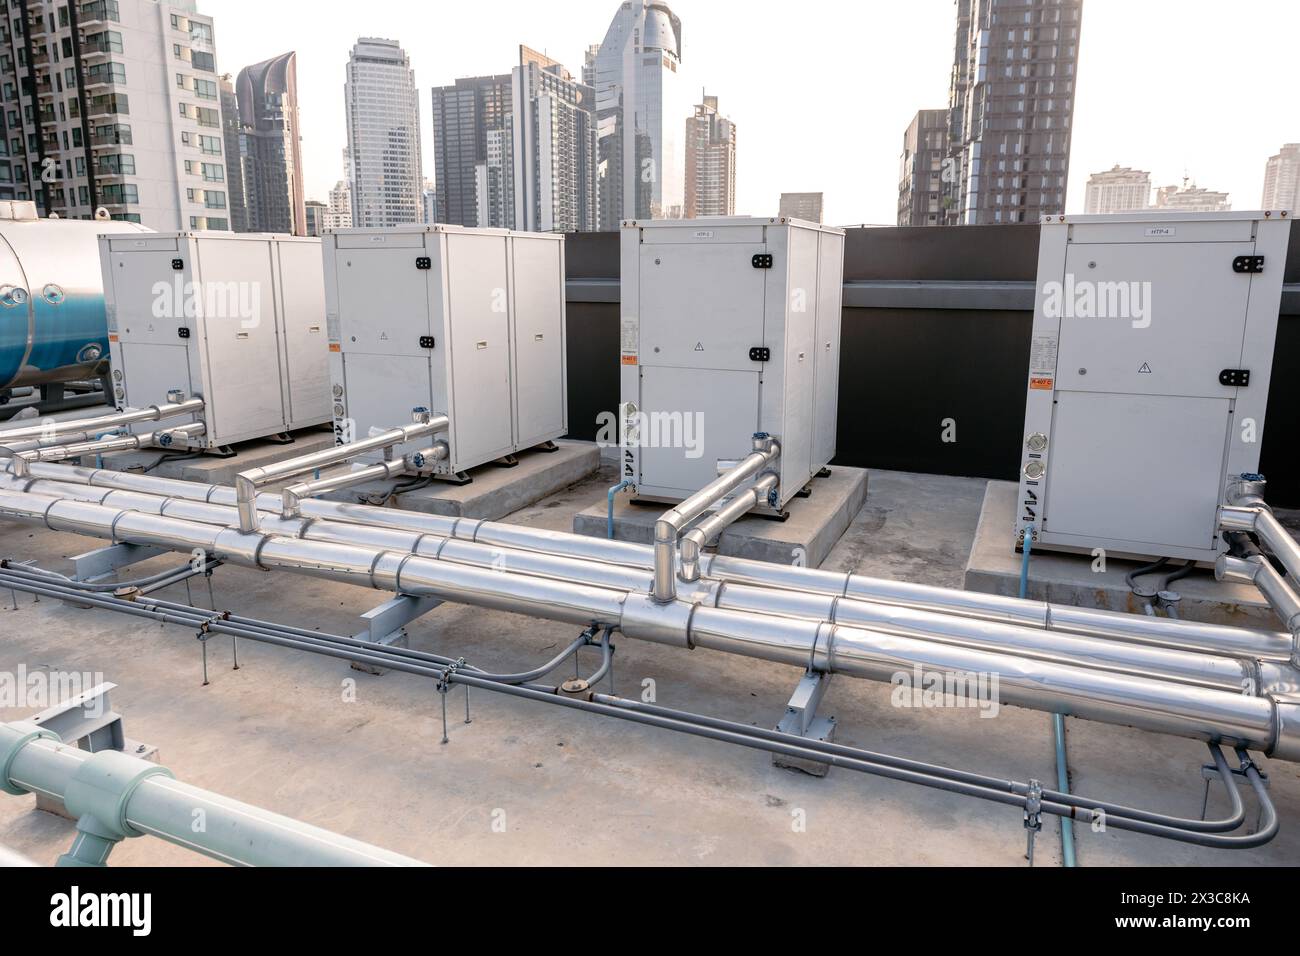 Heat pump Compressor hot water supply by heat exhanger to heating water for hotel or large commercial building roof top outdoor installation. Stock Photo